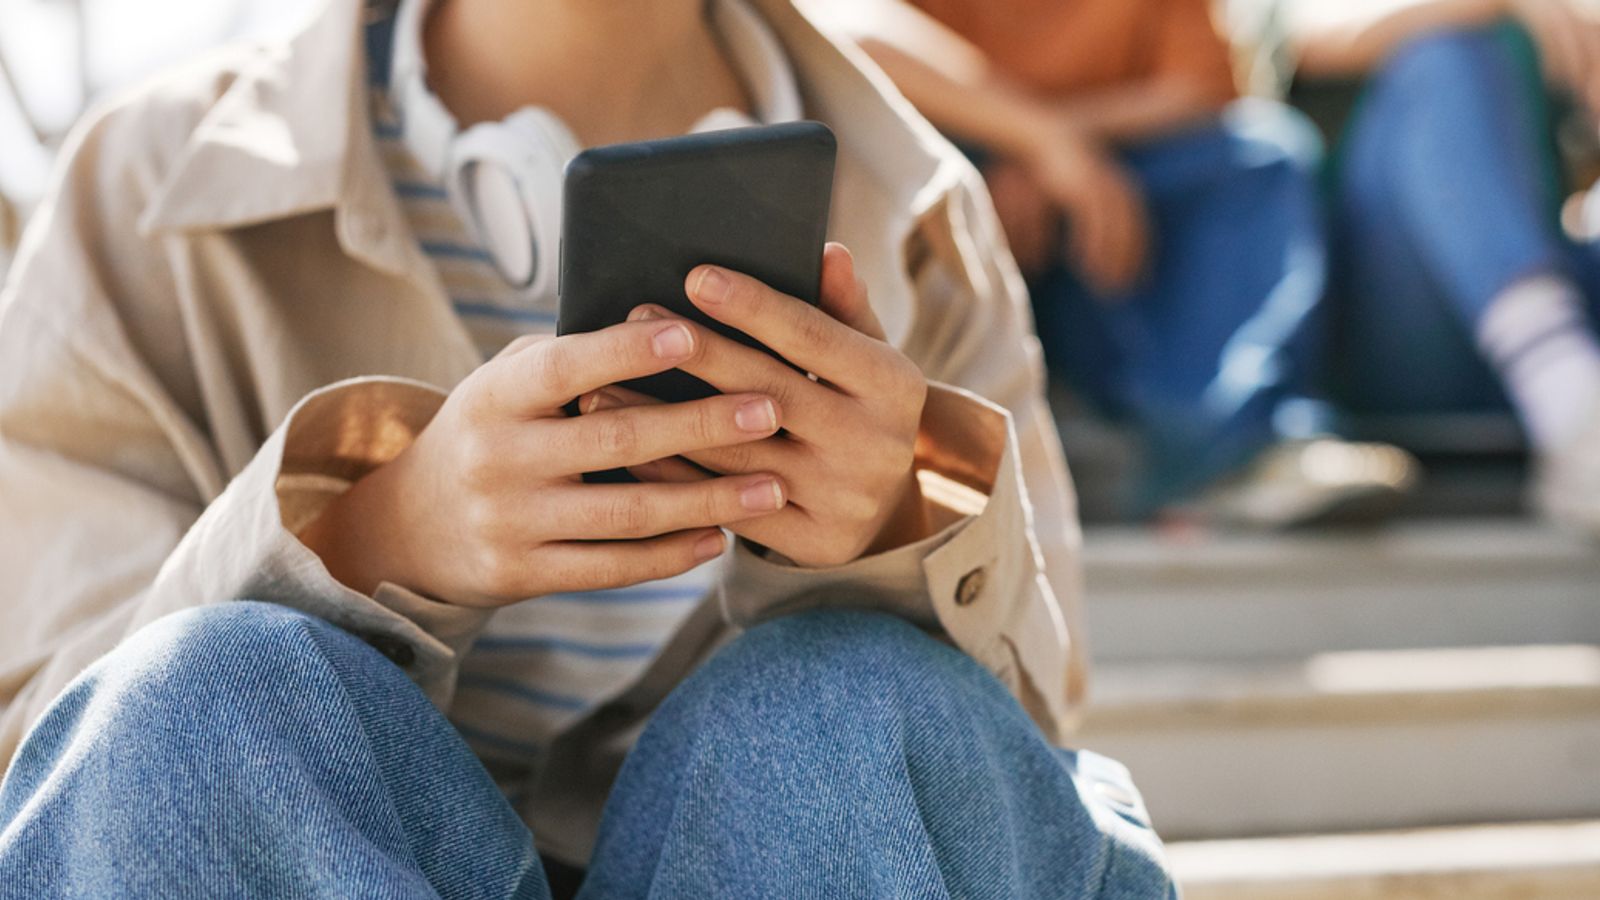 Ban smartphones for under-16s, PM told